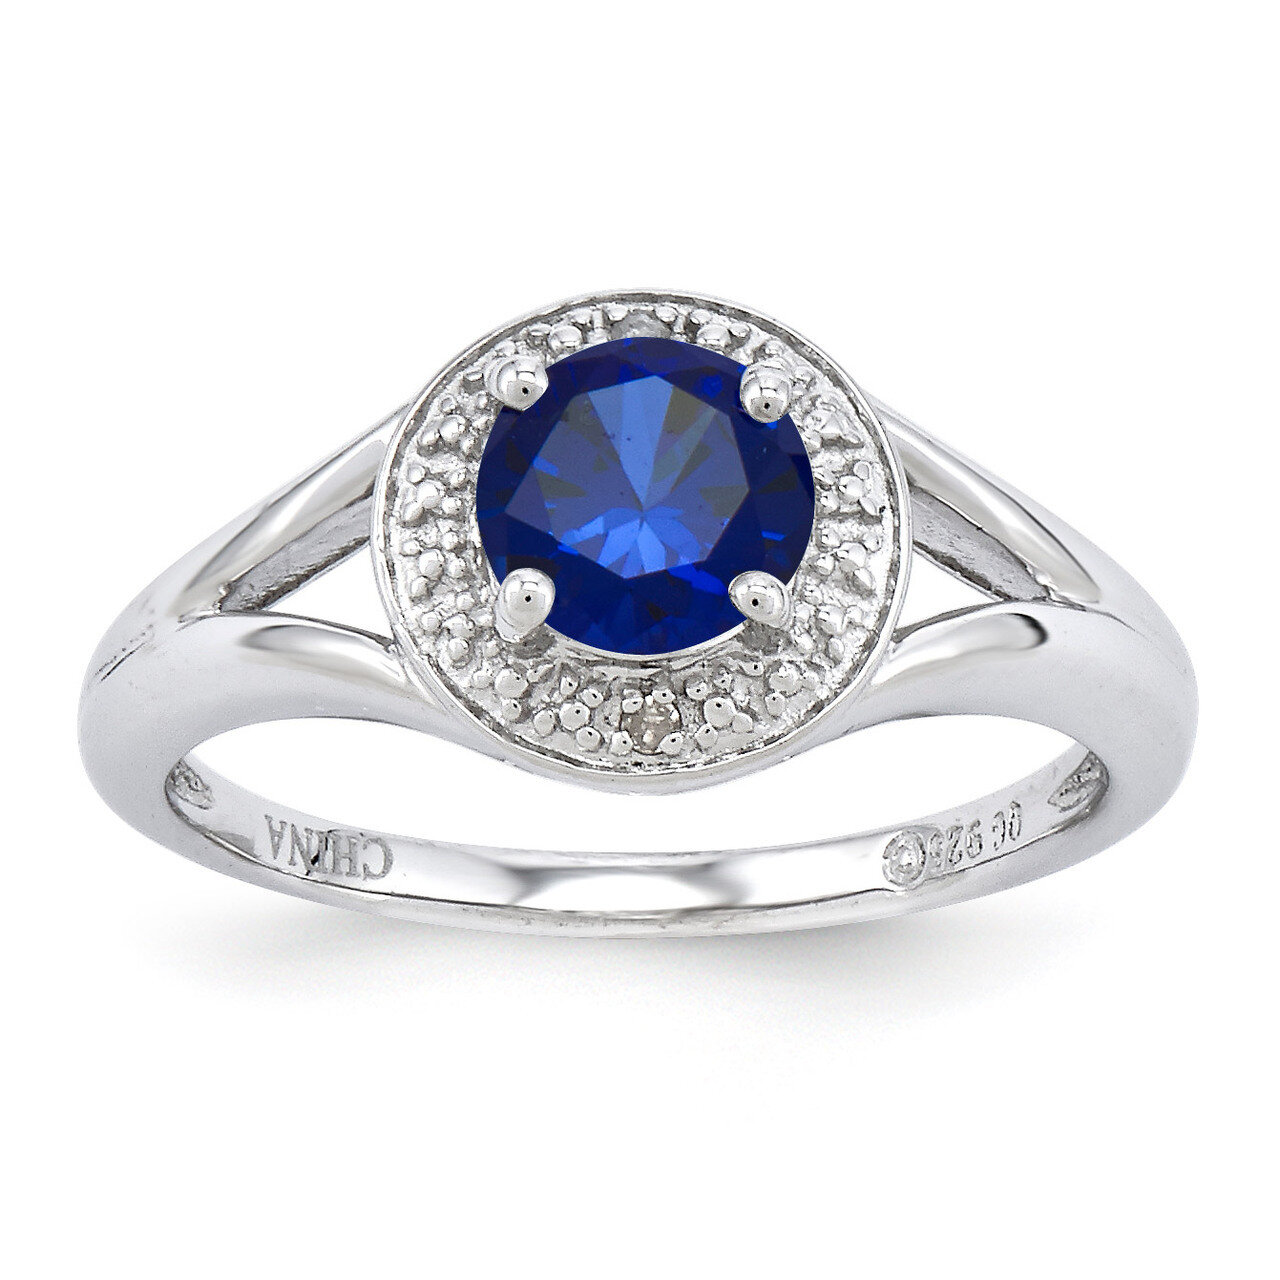 September Created Sapphire Ring Sterling Silver Diamond QBR11SEP